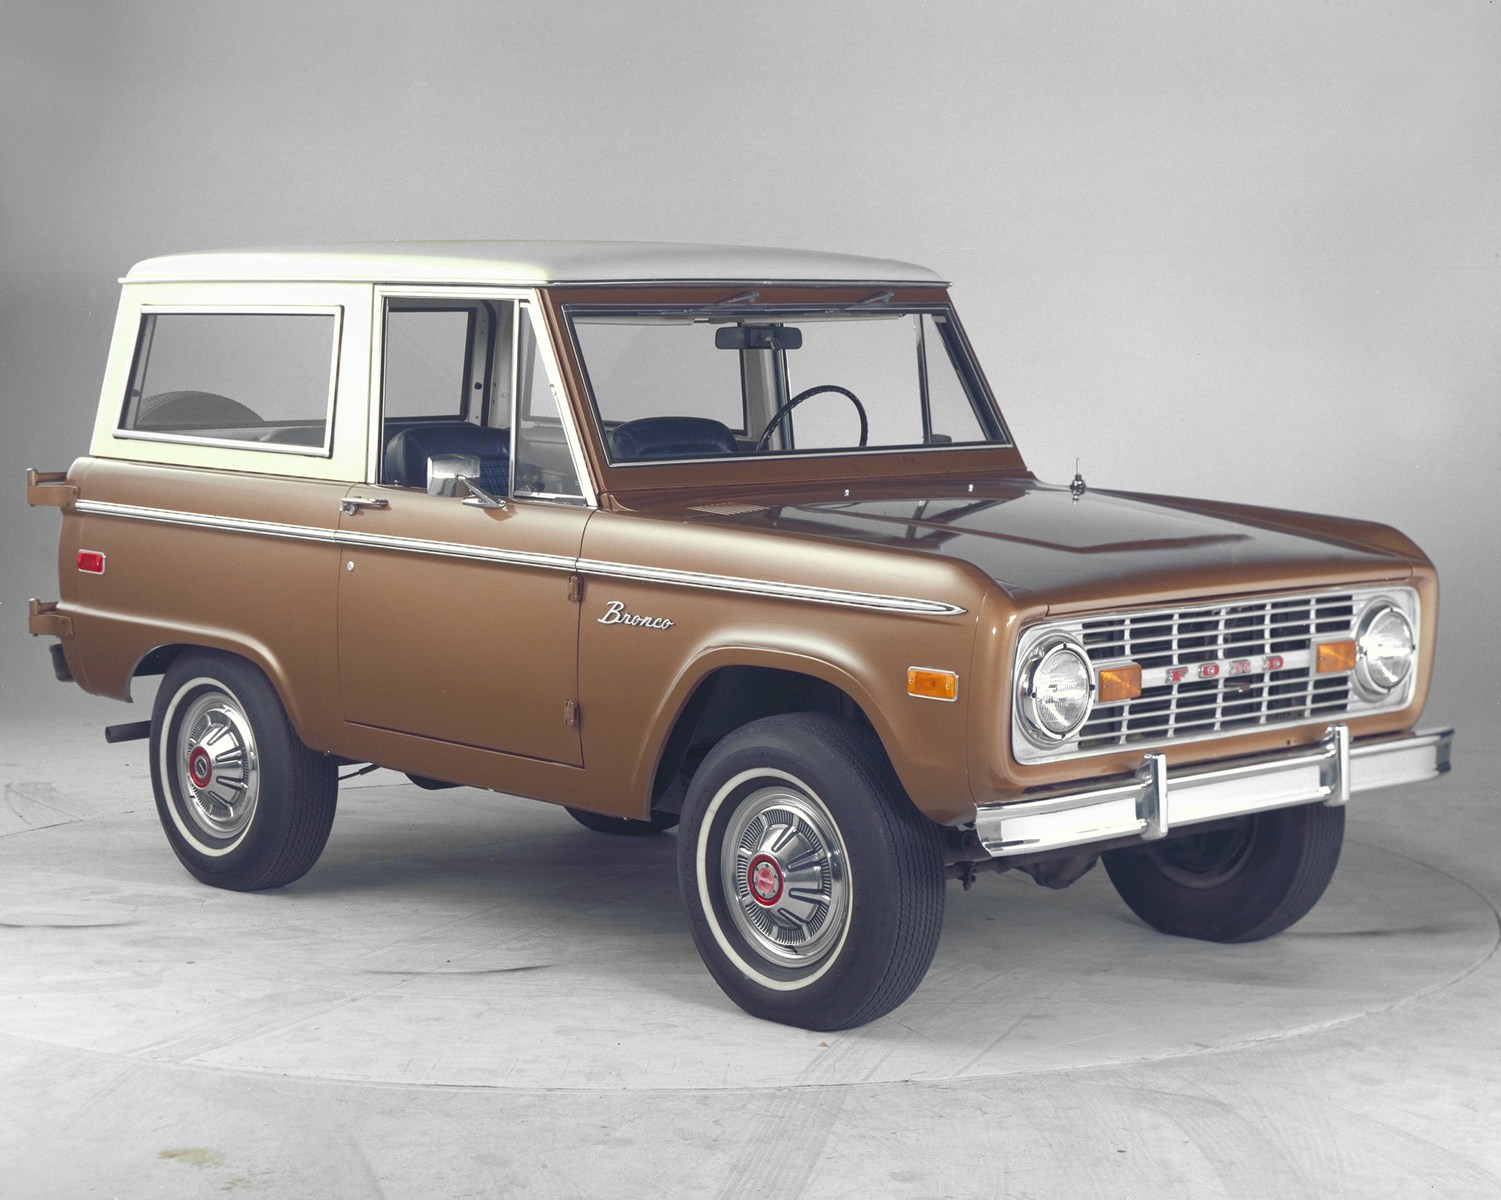 Ford Broncos Are Some Of The Hottest Classic Vehicles At The Moment ...